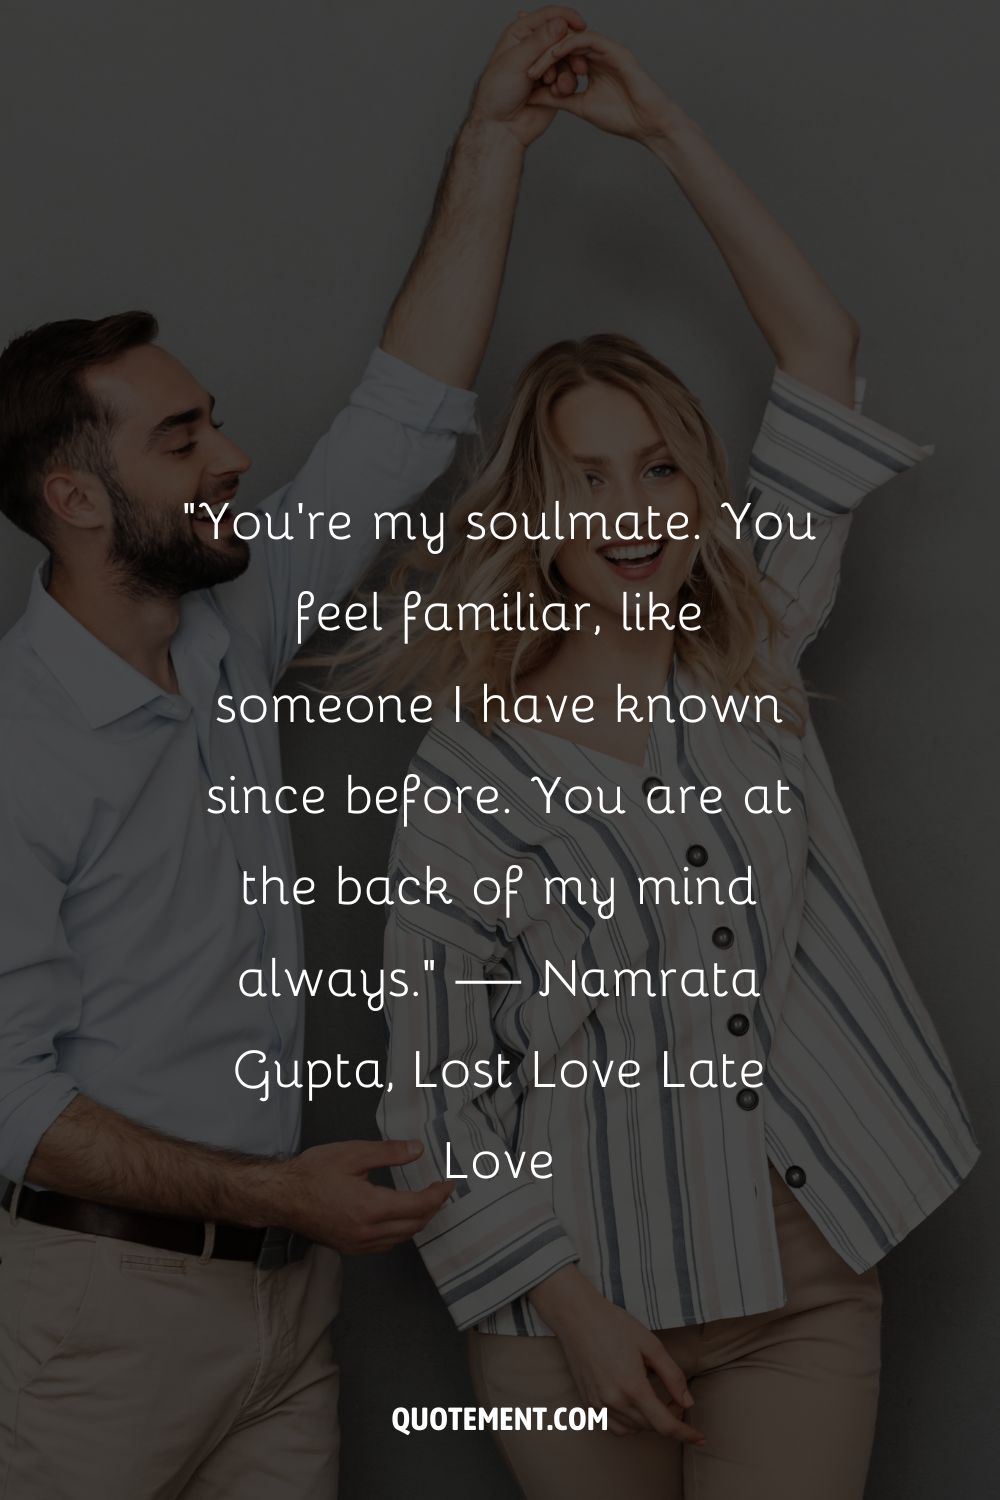 a smiling couple in a dancing pose representing you are my soulmate quote